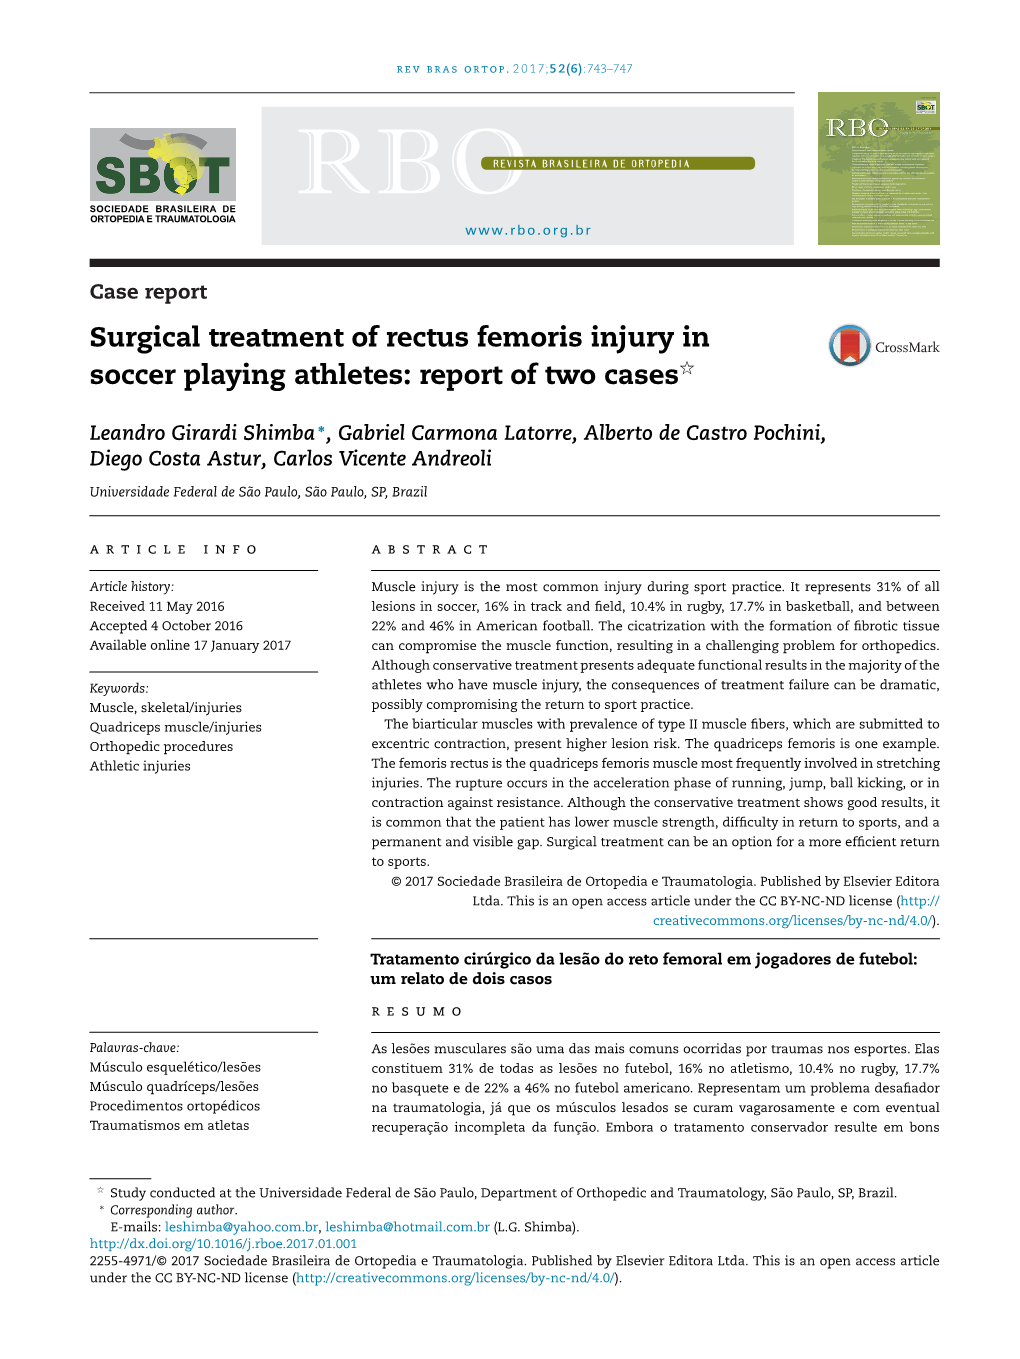 Surgical Treatment of Rectus Femoris Injury in Soccer Playing Athletes